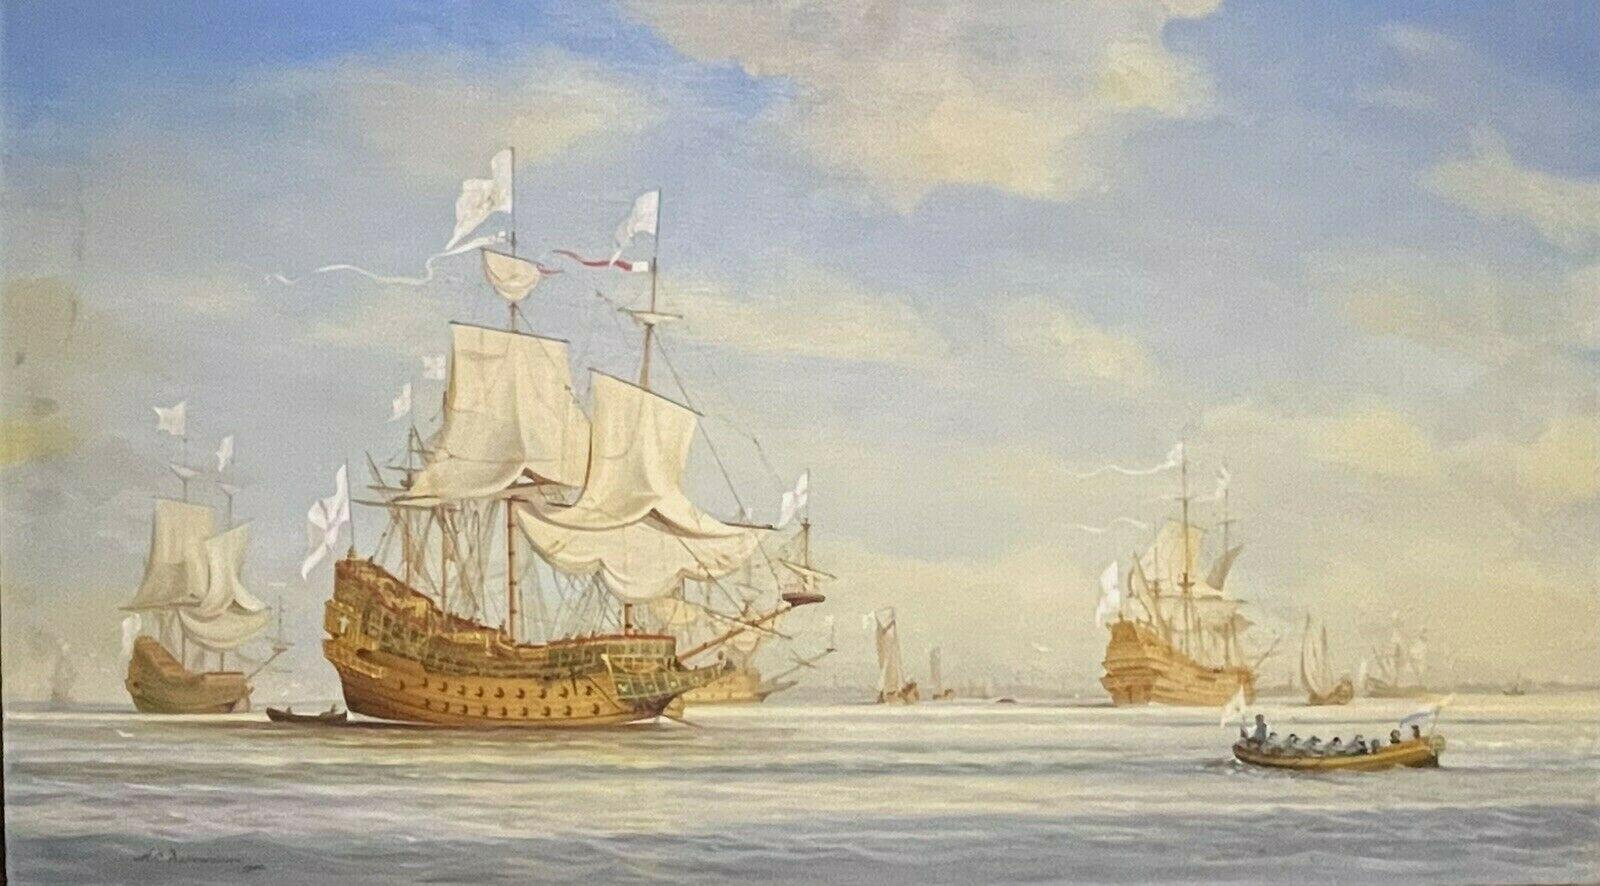 17th Century Ship - 22 For Sale on 1stDibs